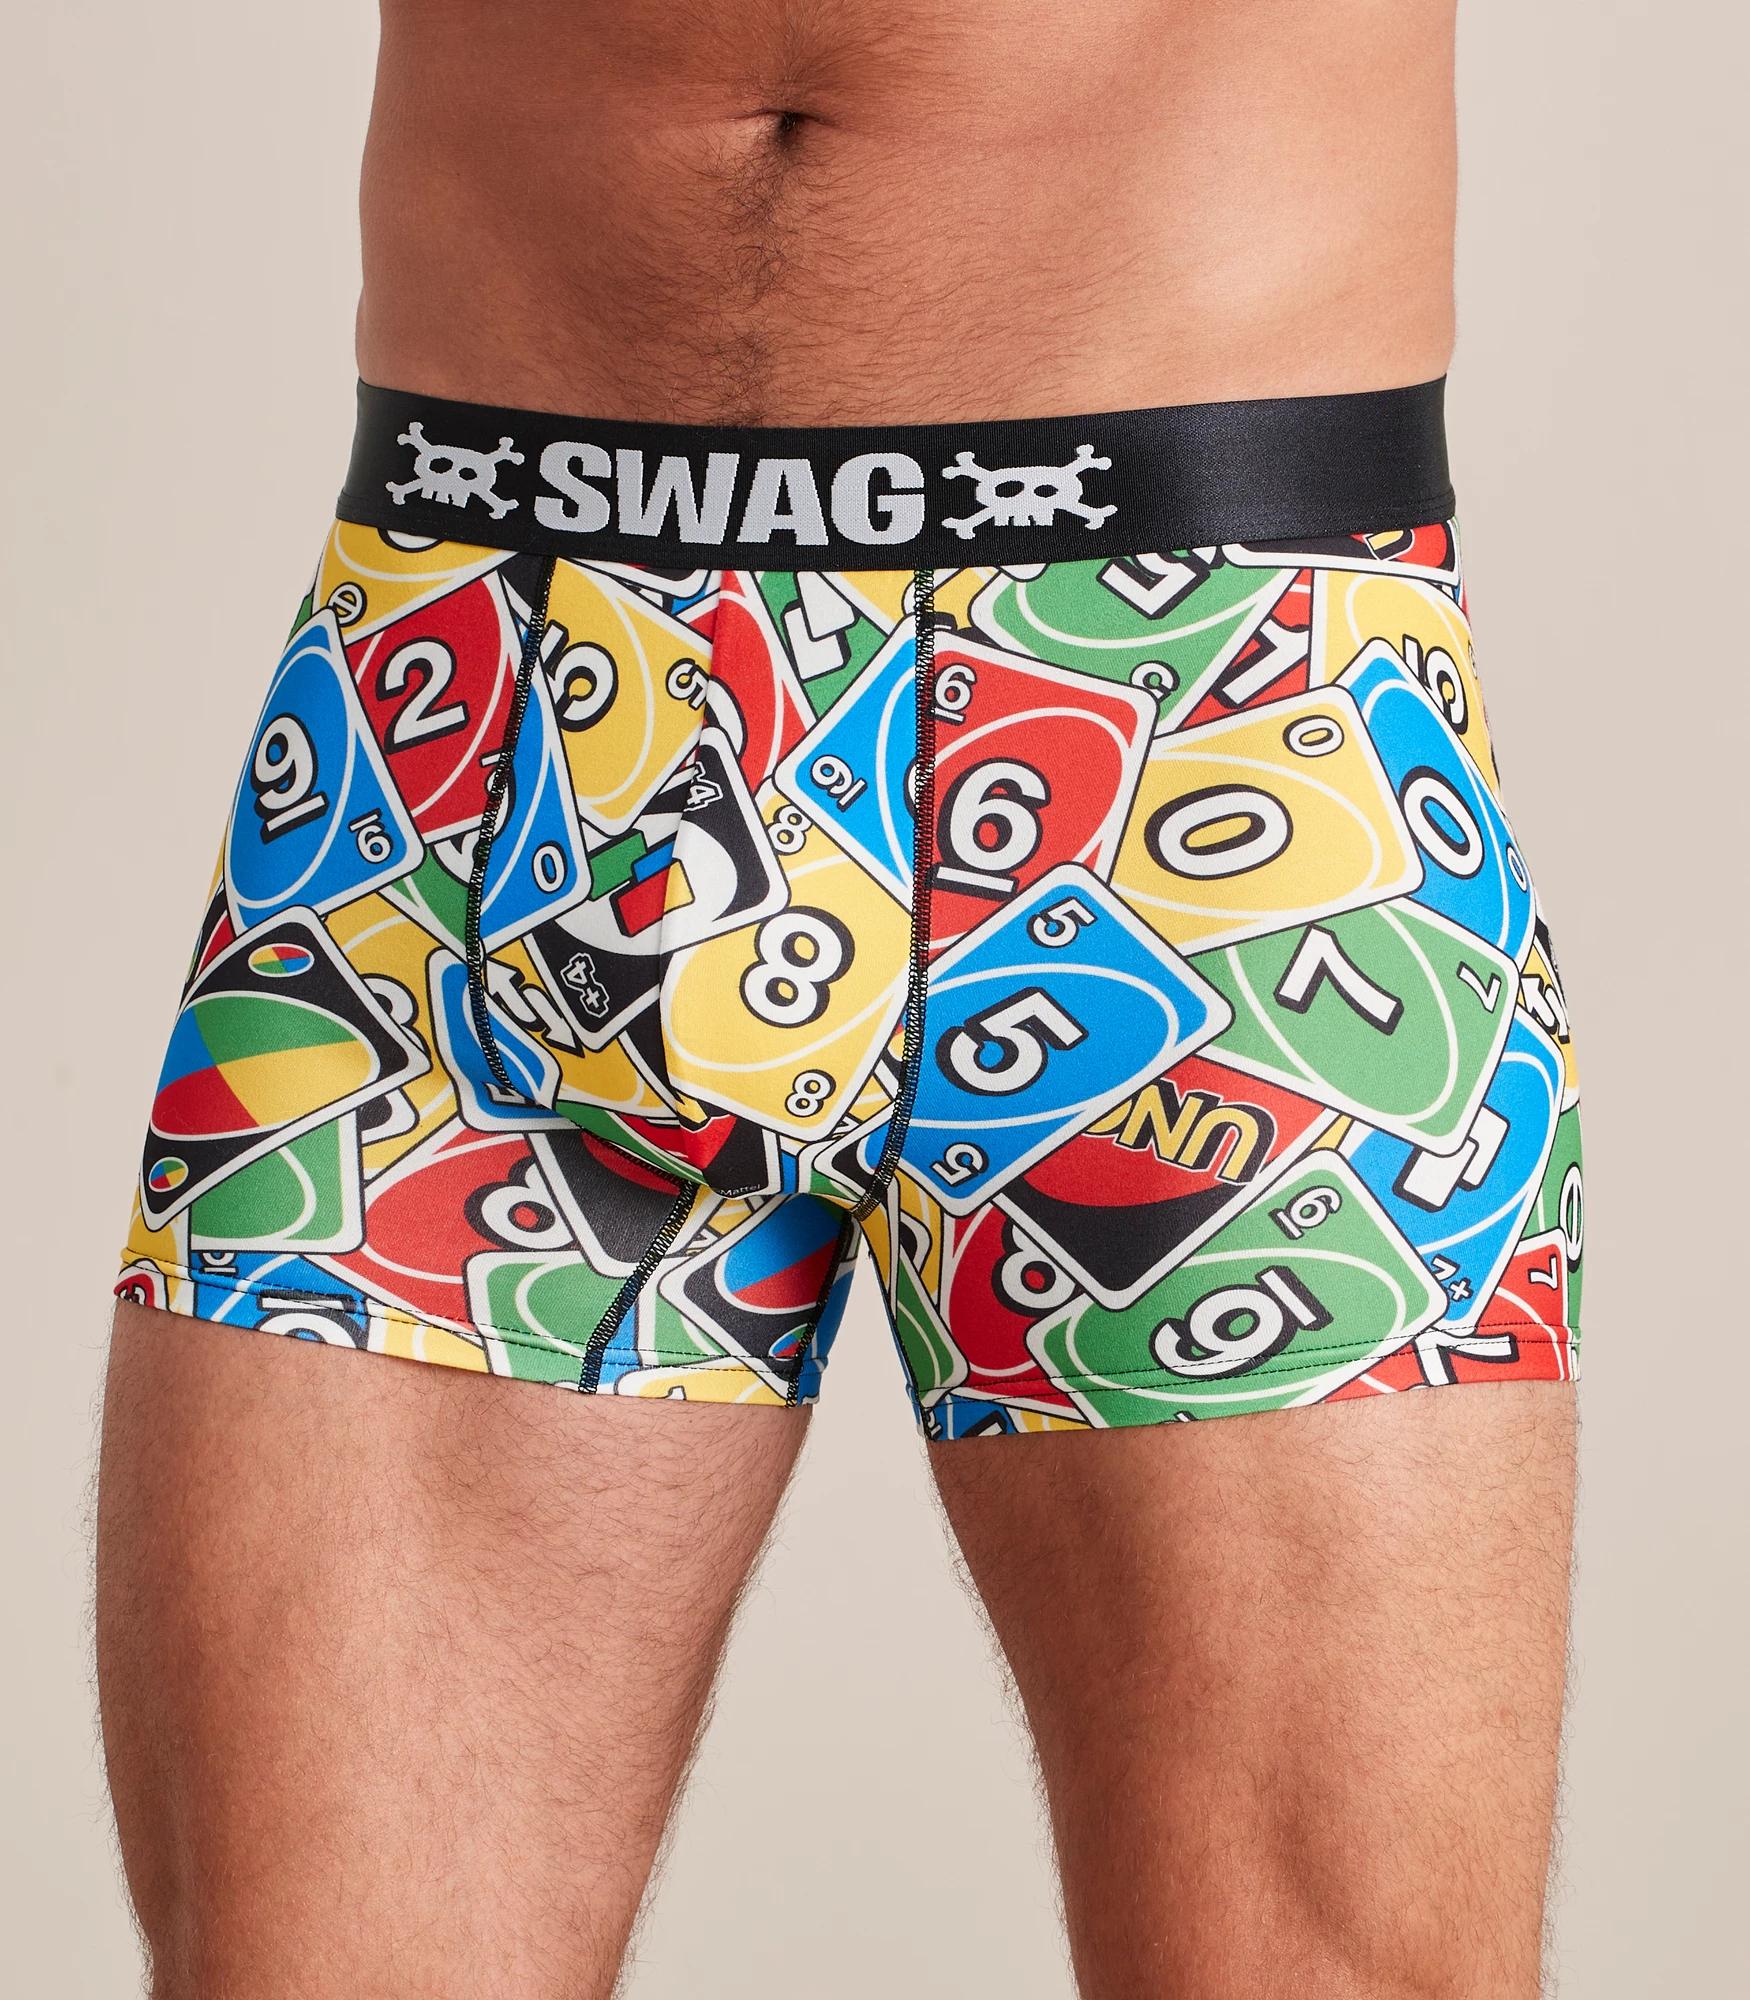 Target Launches SWAG Boxers